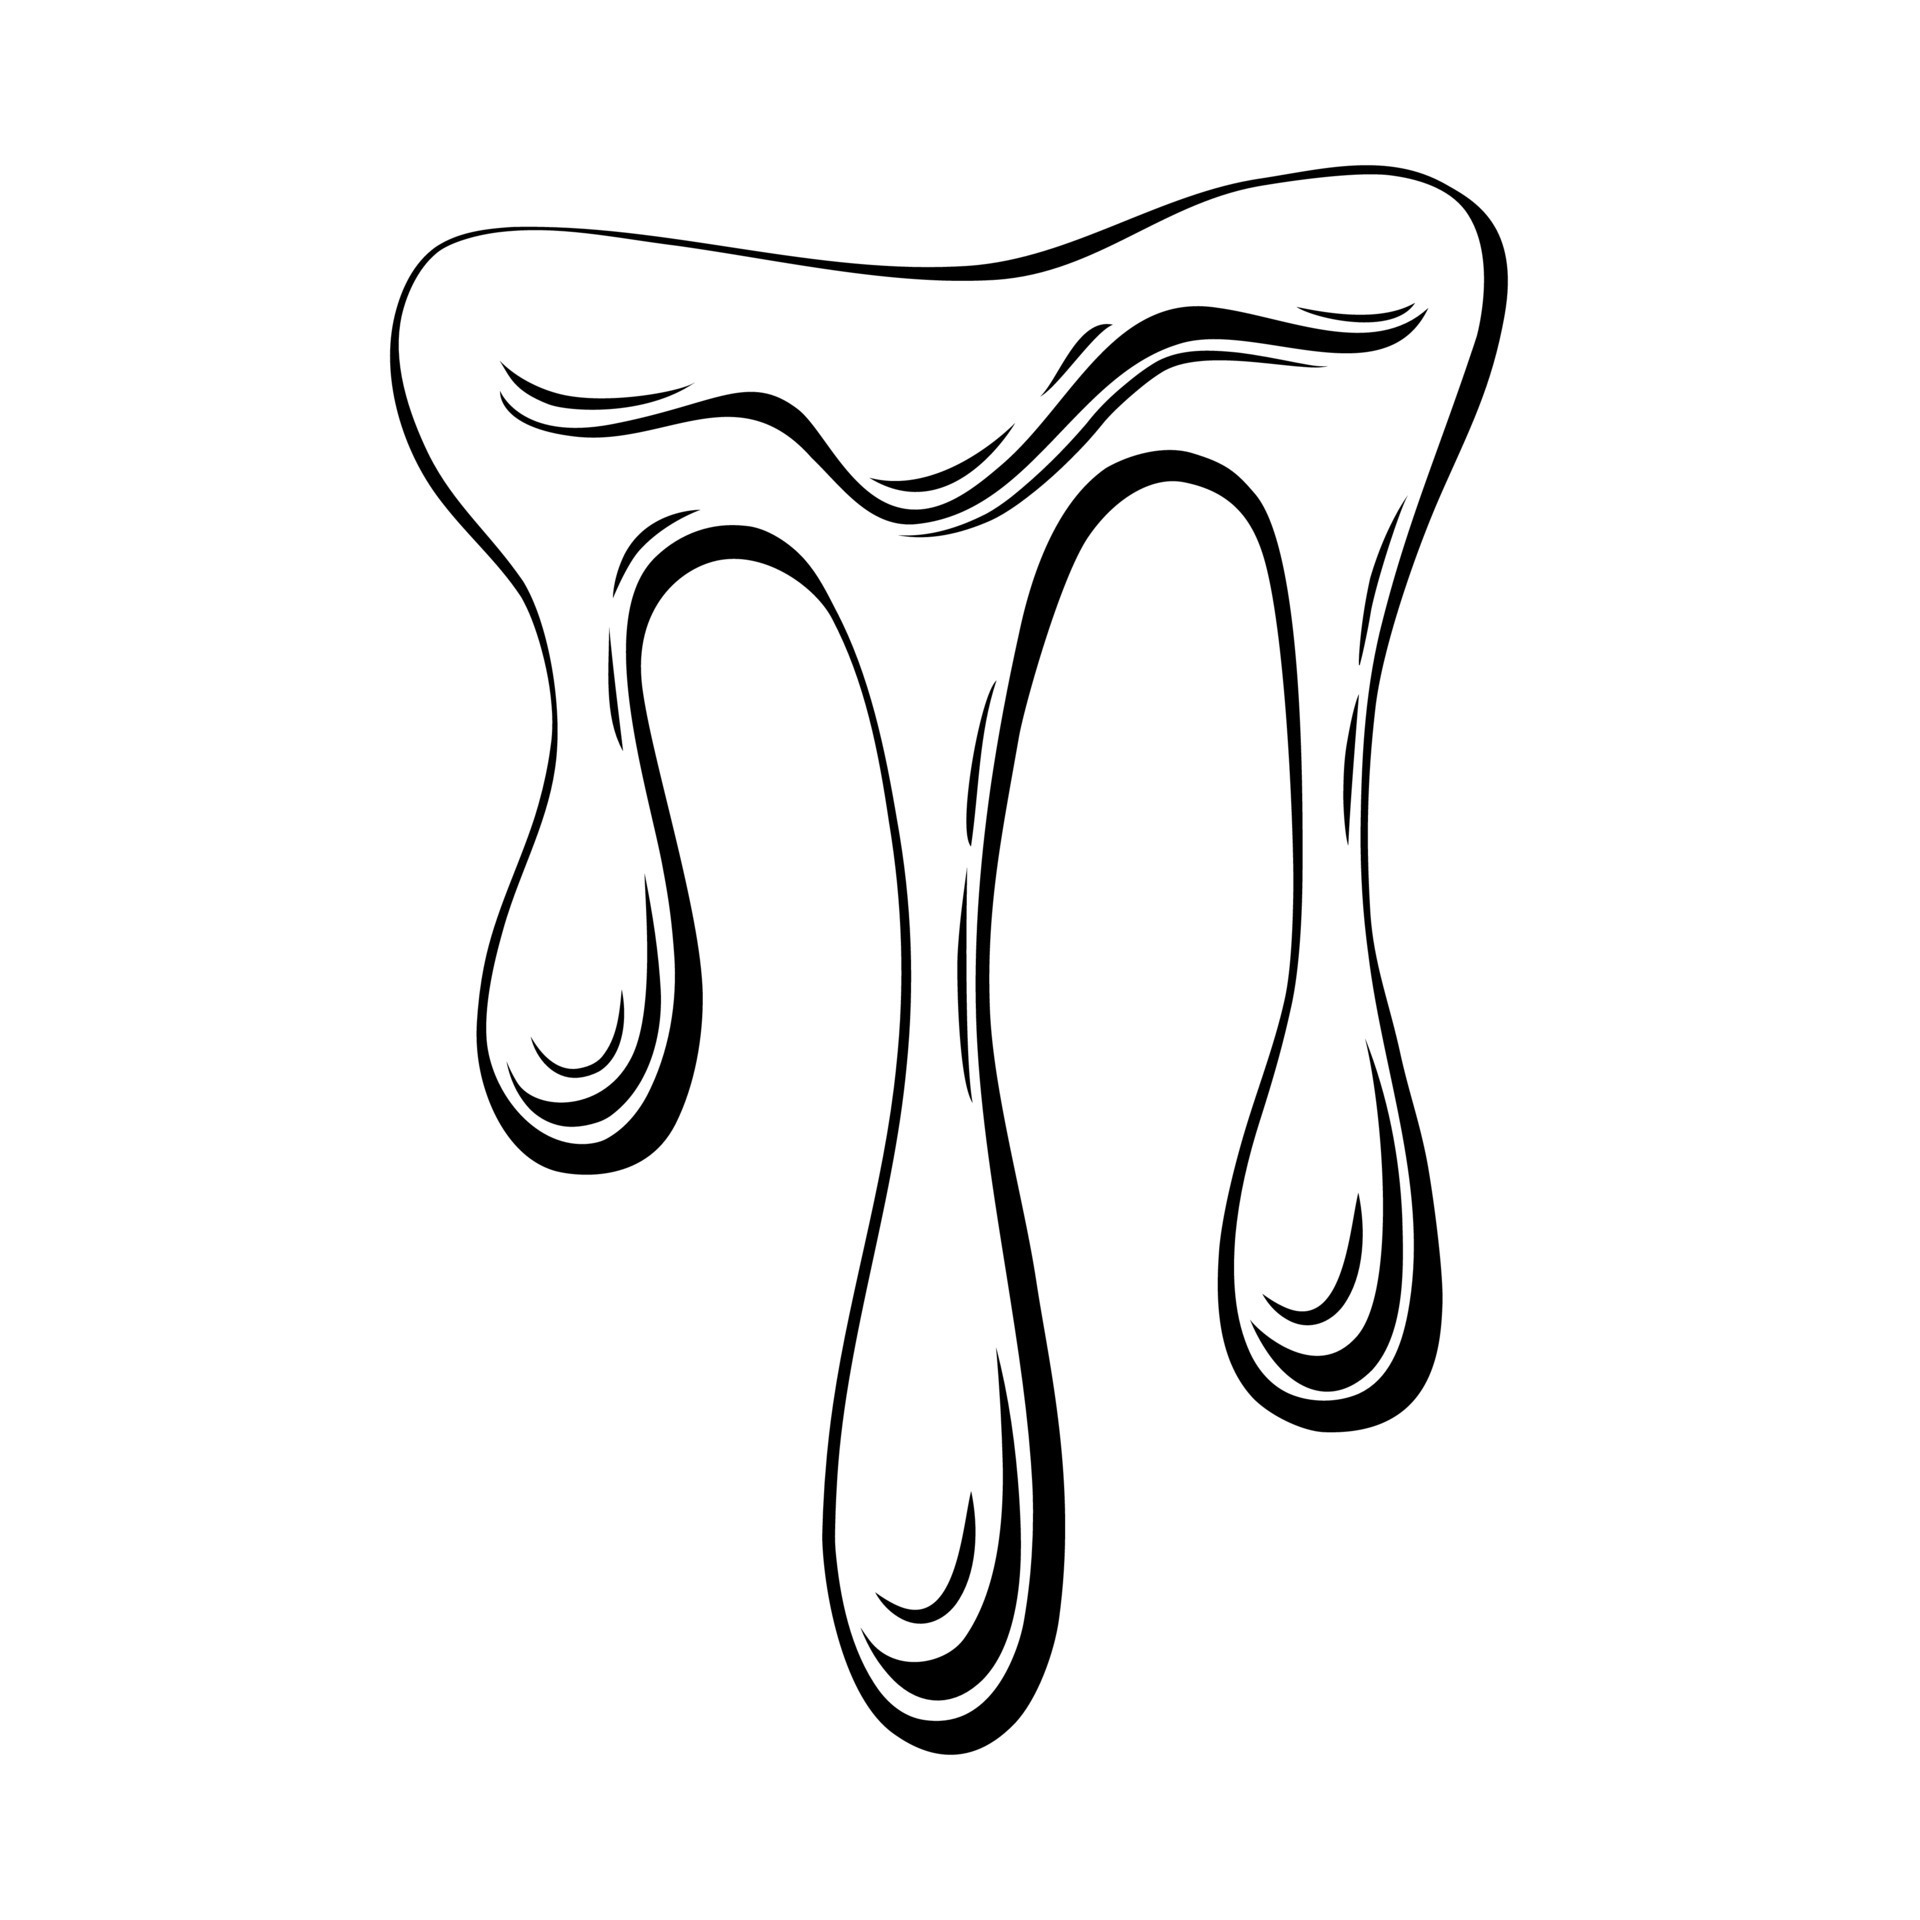 Dripping liquid outline. Contoured black and white illustration of a ...